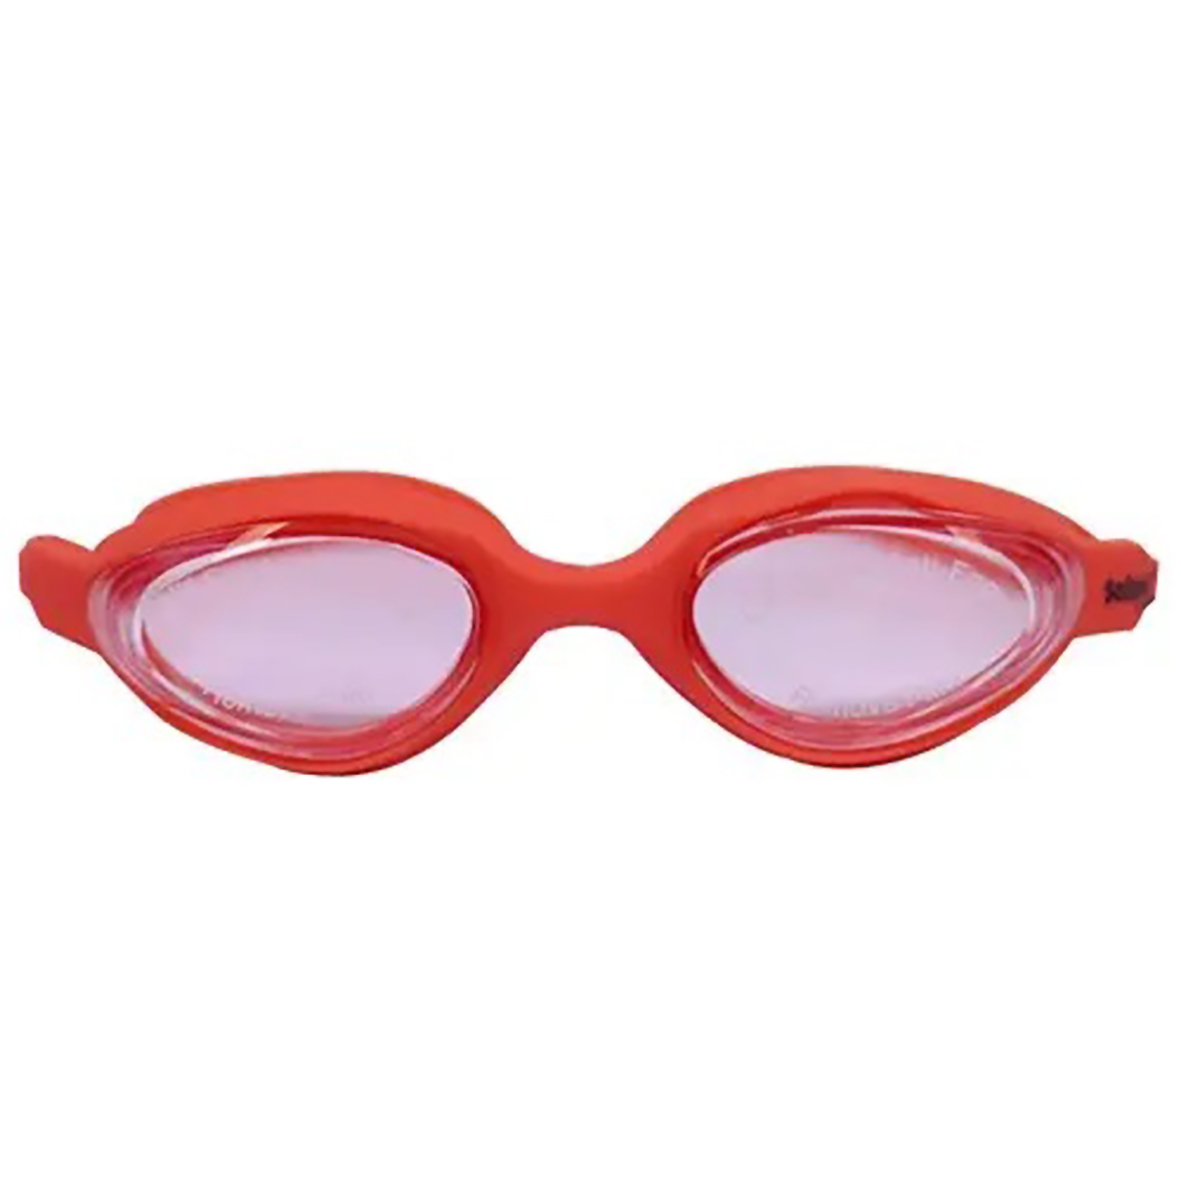 SOFTEE MODERN SWIMMING GOGGLE, RED.